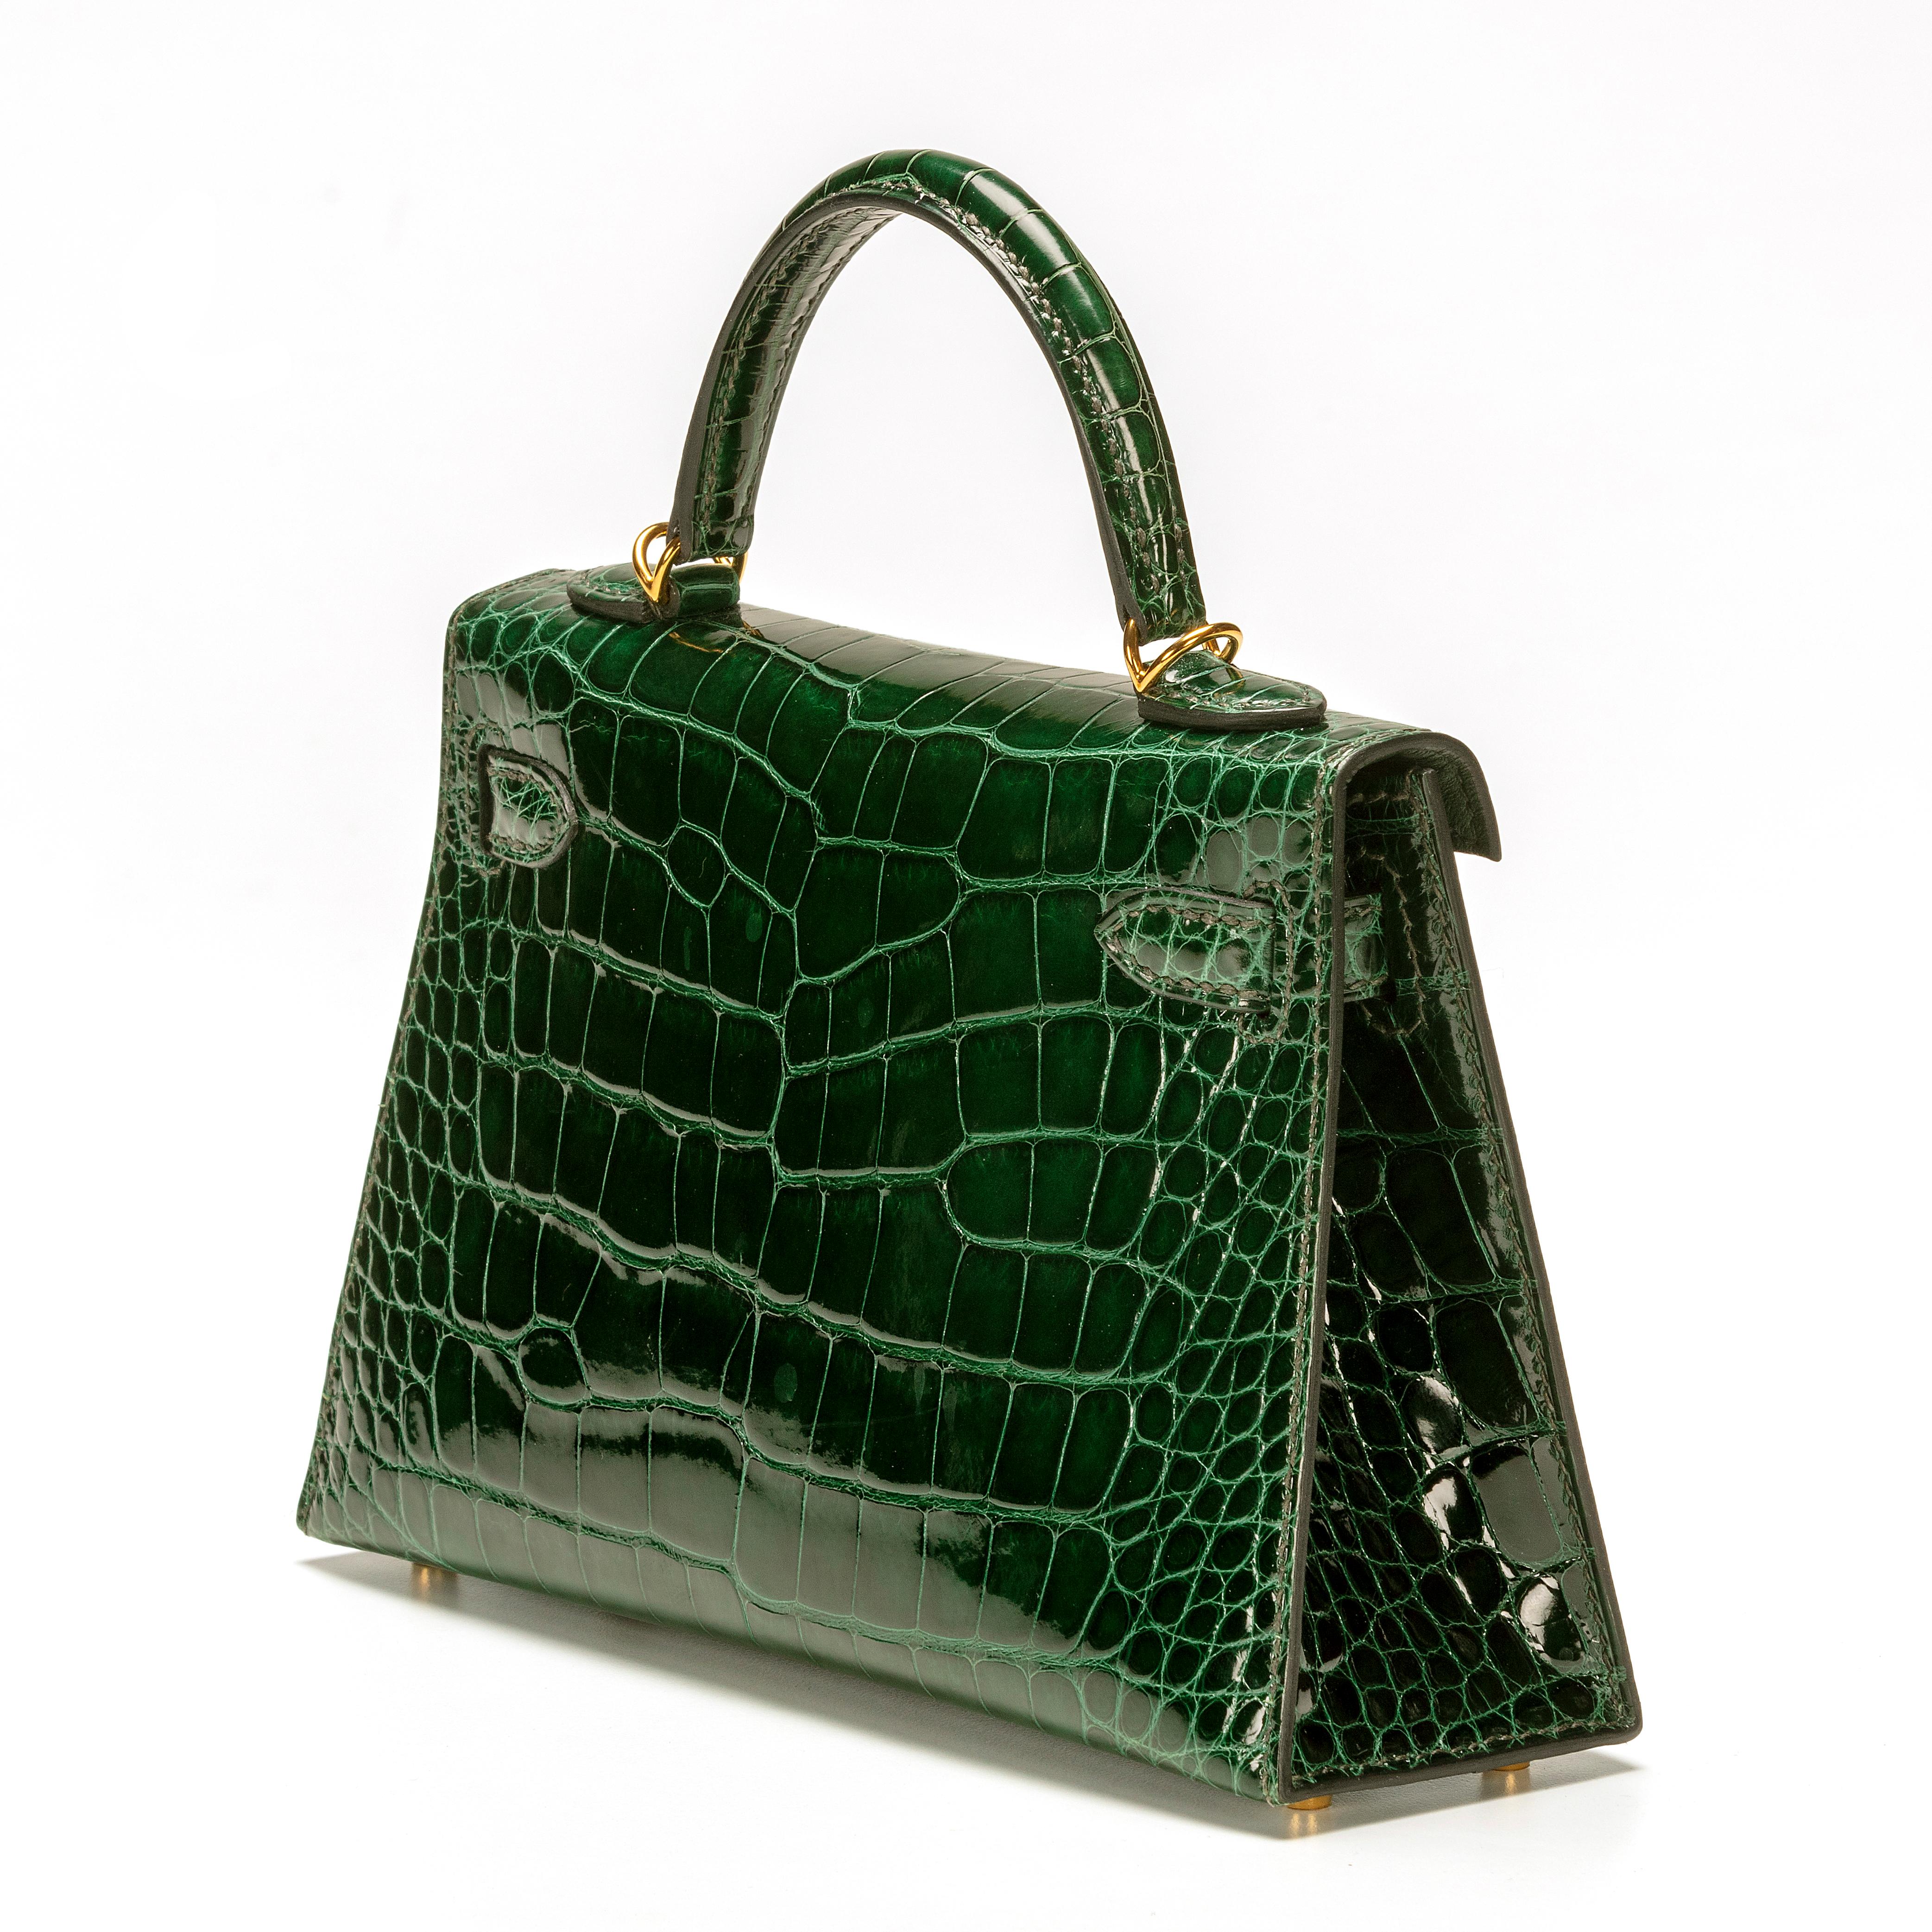 This Gorgeous Hermès Mini Kelly is extremely sought after. Featured in Vert Foncé a Dark Green exotic leather exterior with Gold Hardware and a green leather interior including a slip pocket. The bag incorporates a front flap with a turn lock